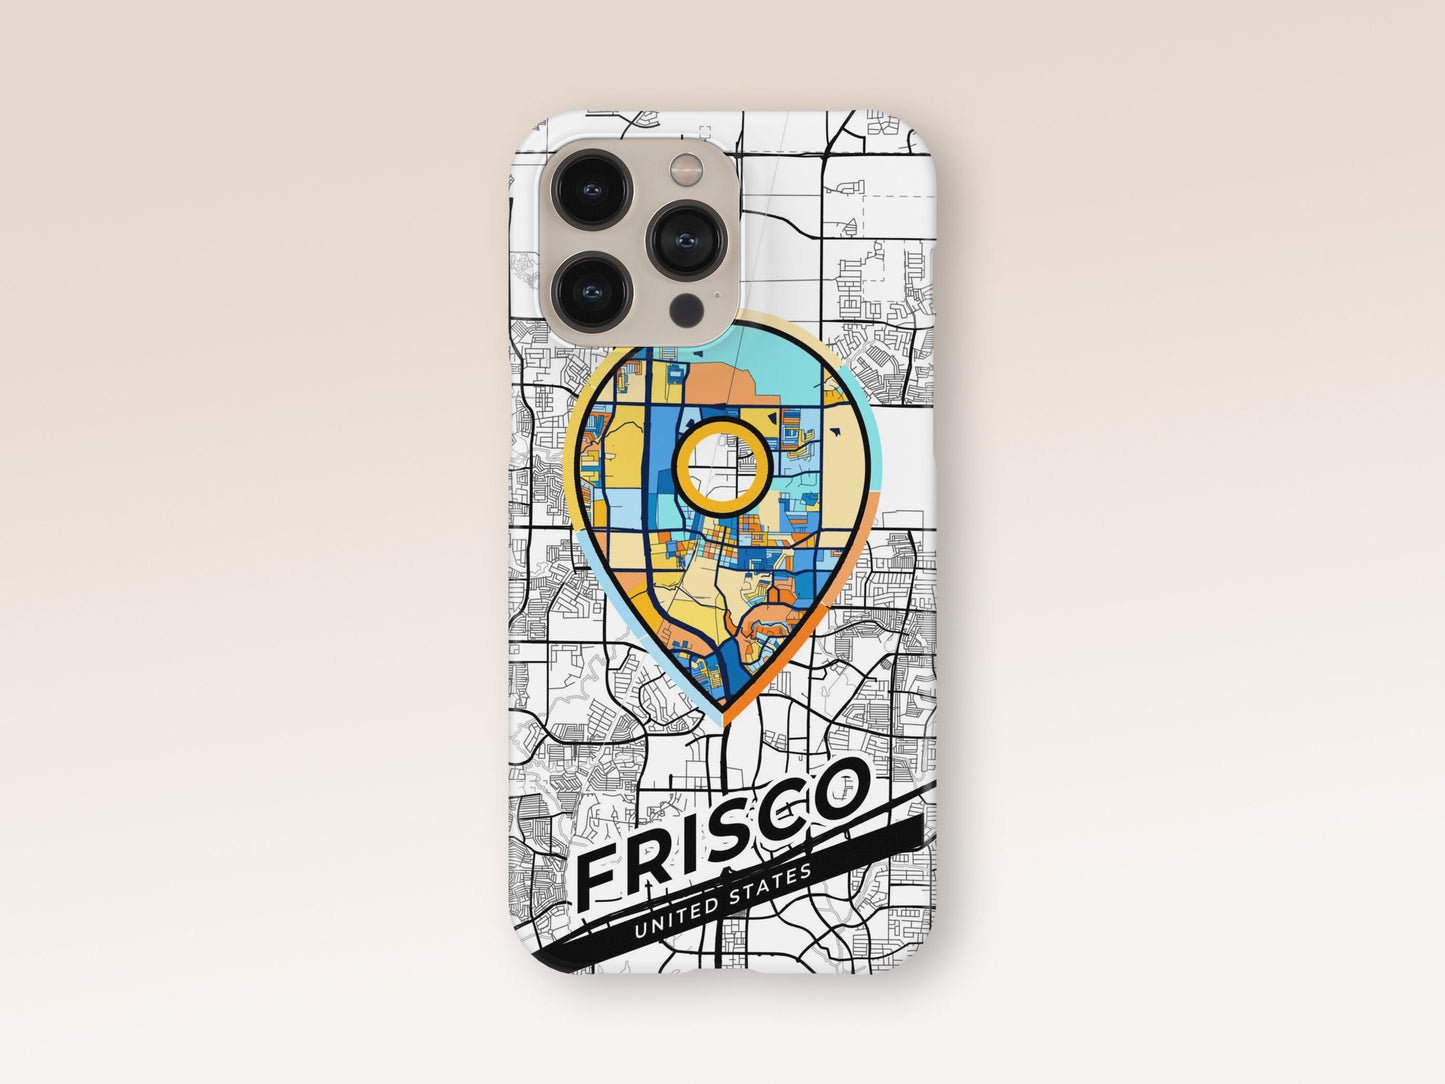 Frisco Texas slim phone case with colorful icon. Birthday, wedding or housewarming gift. Couple match cases. 1